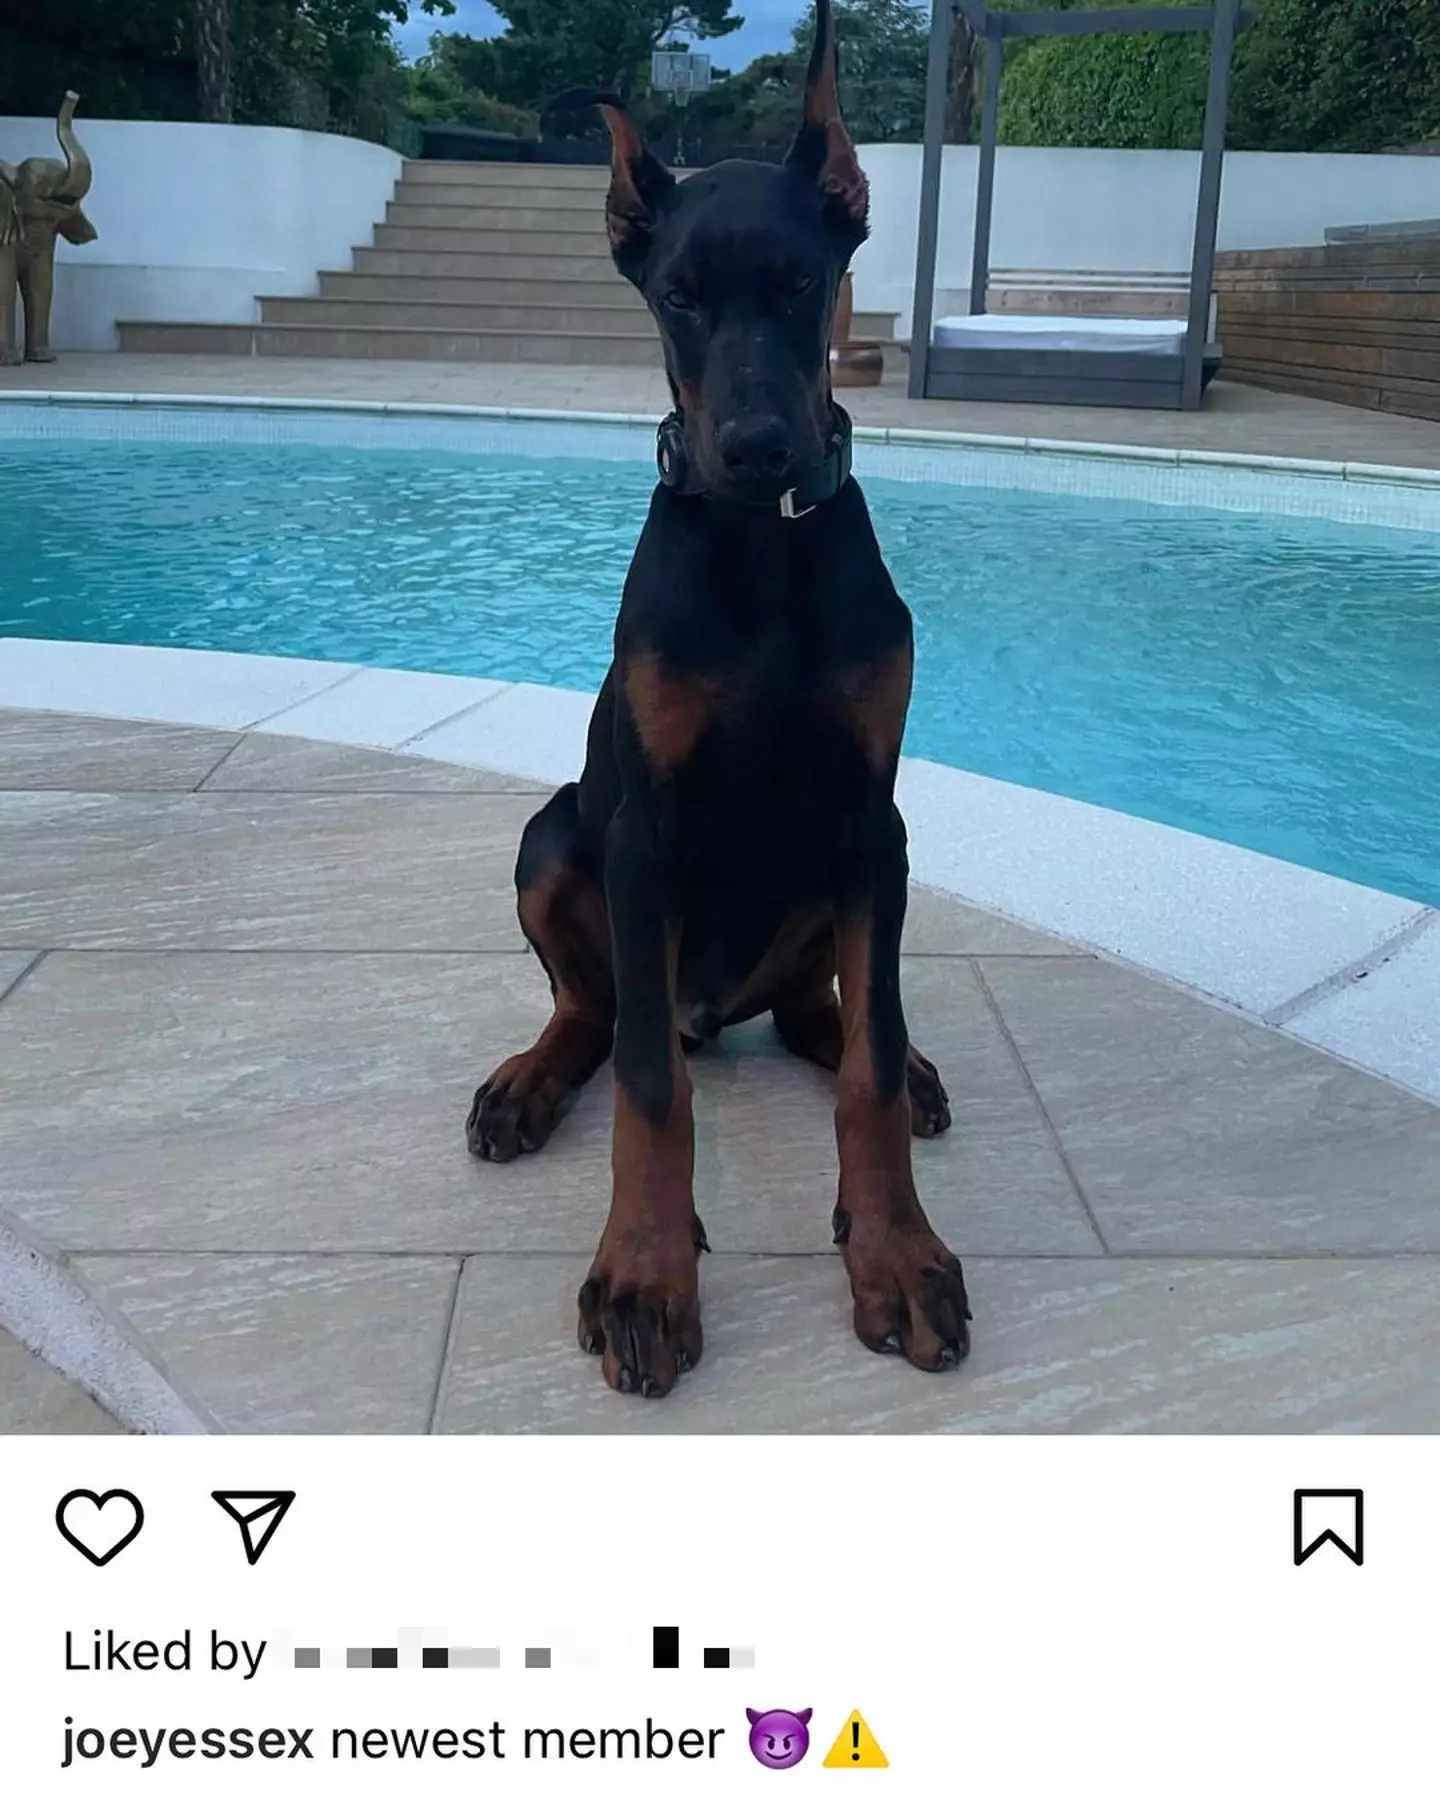 Joey shared a picture of a Doberman on social media.